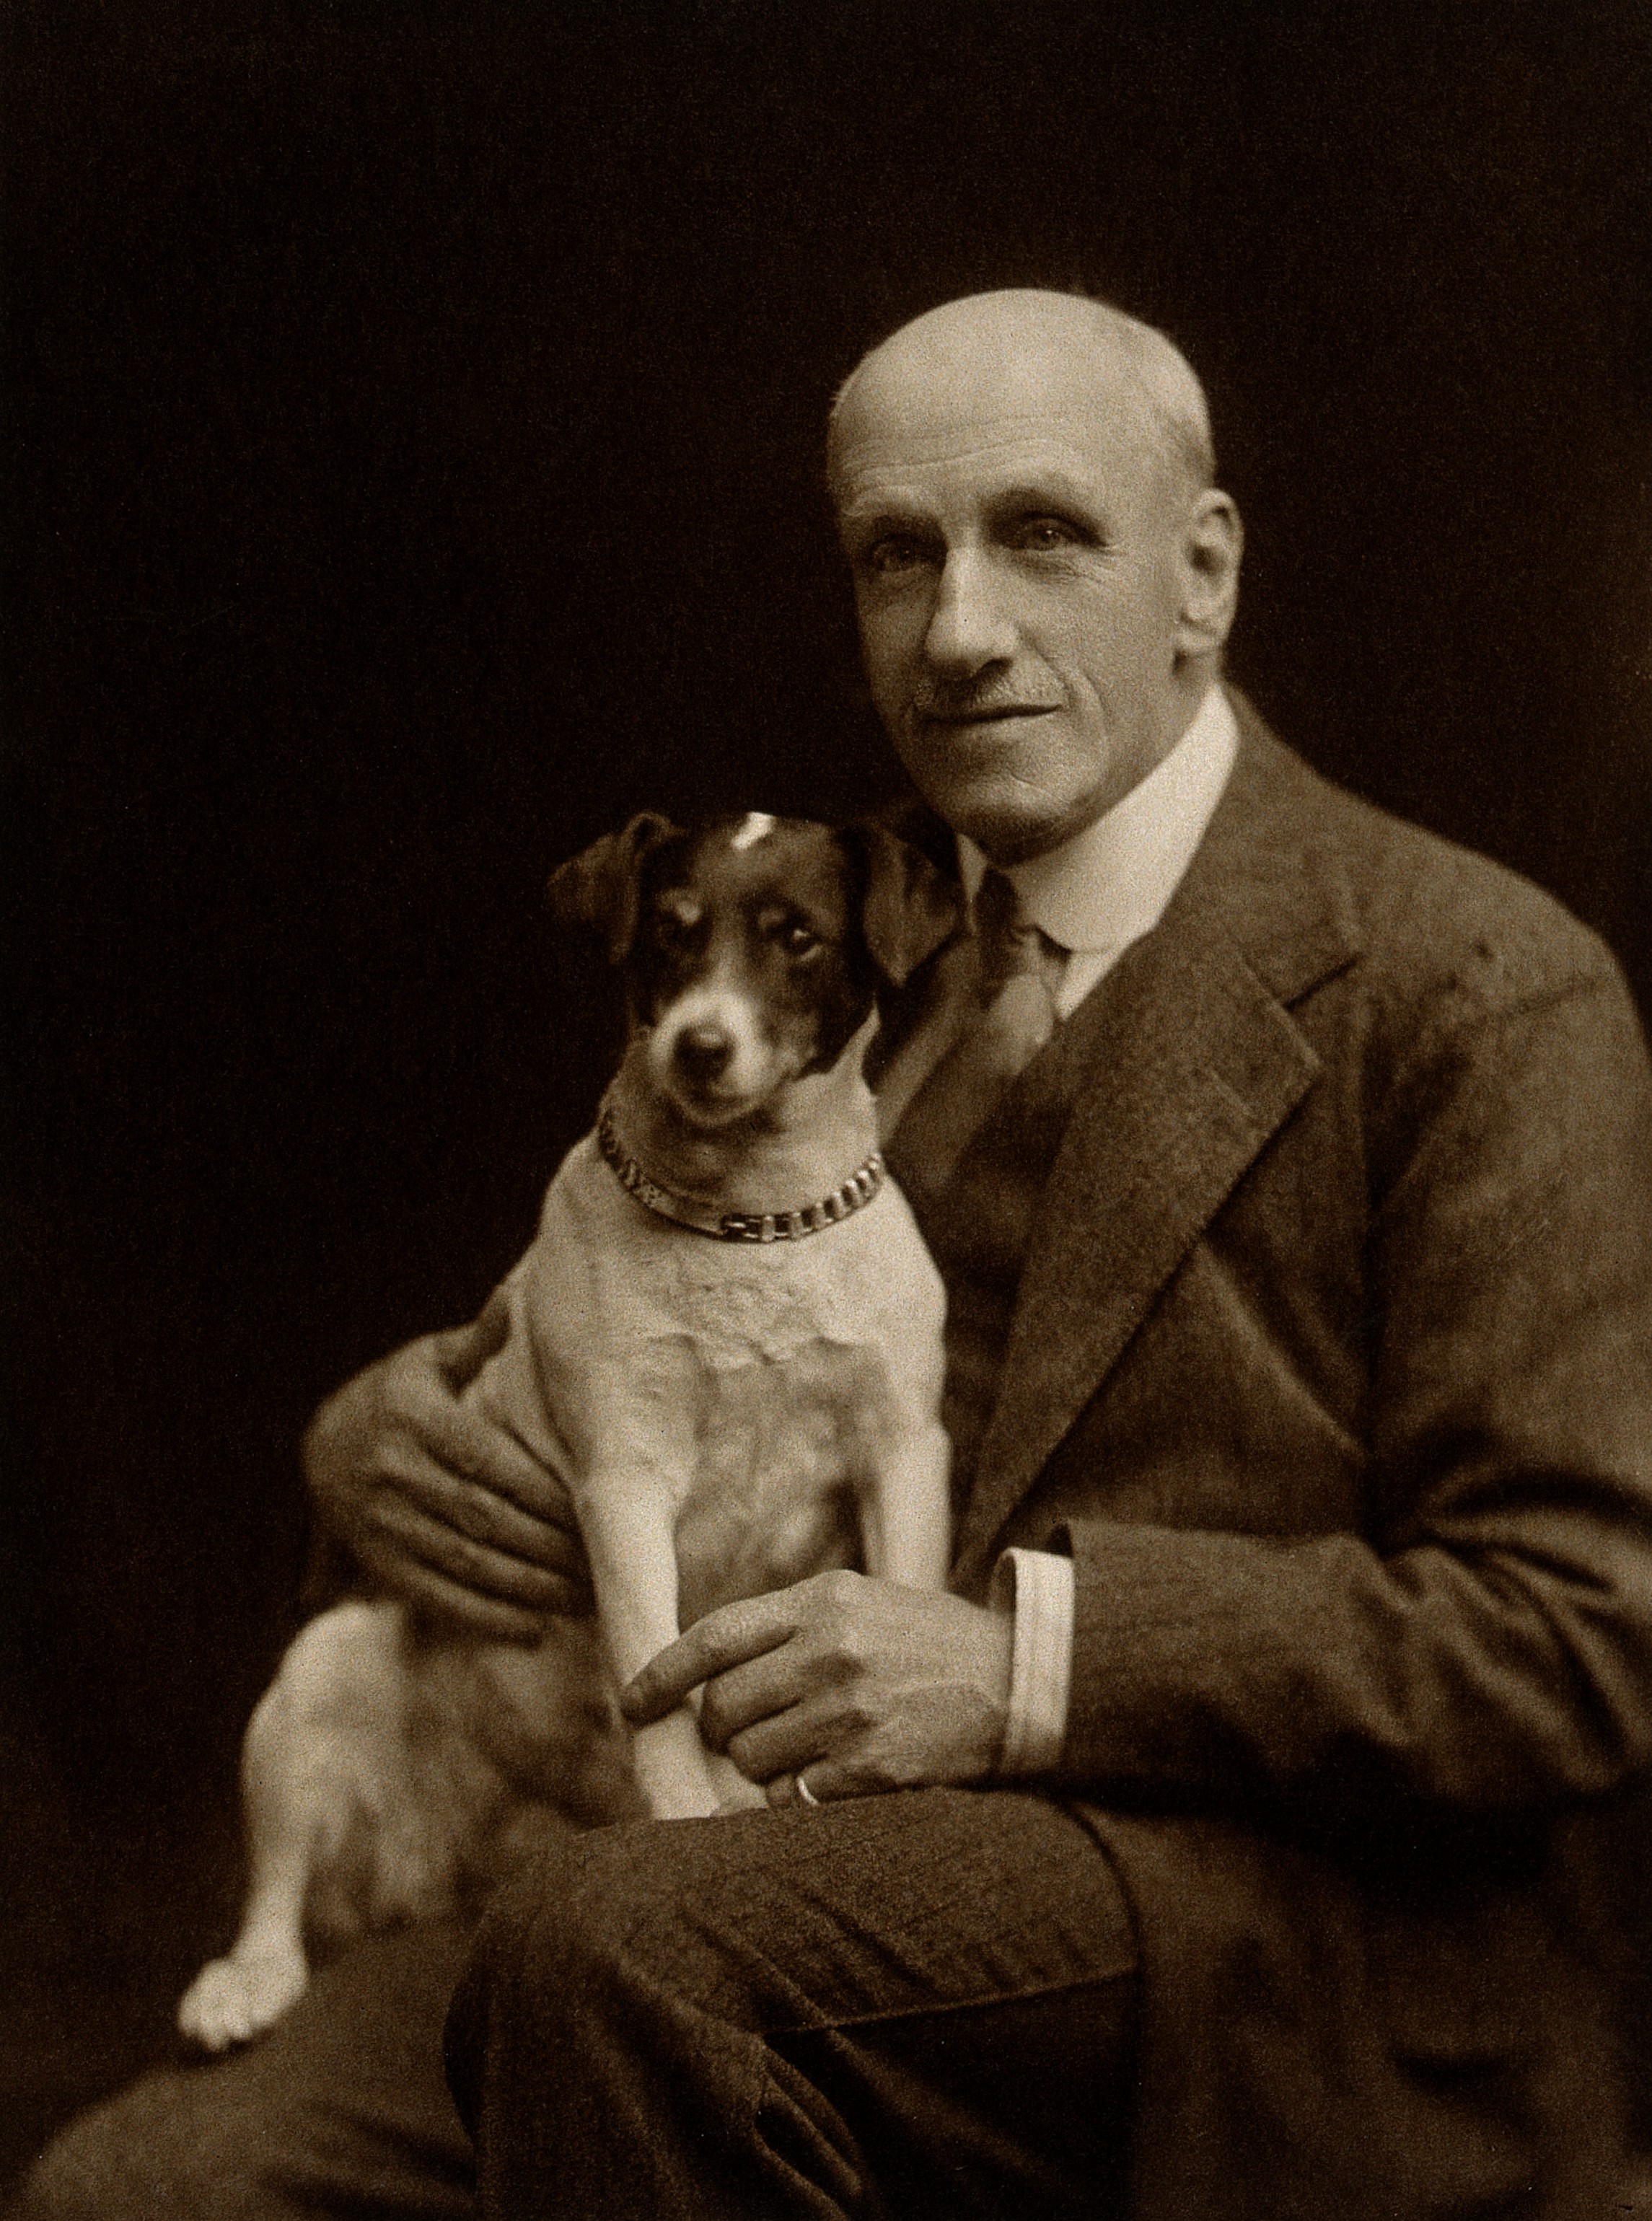 Charles Firmin Cuthbert with dog. Photograph by Debenham, 19 Wellcome V0027646